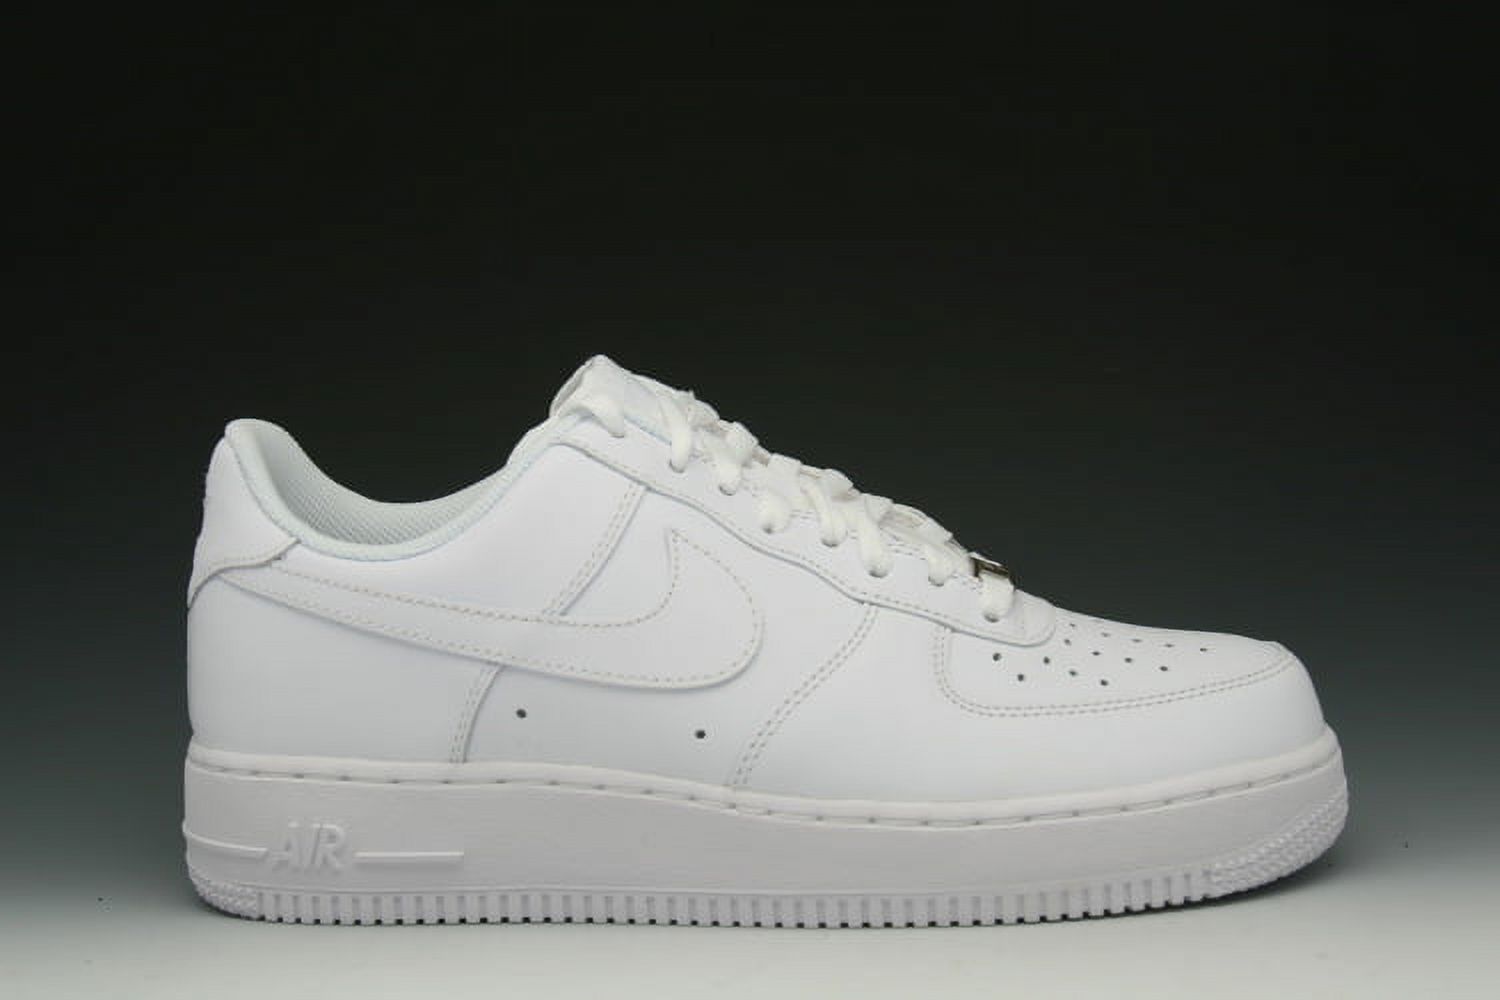 Nike Mens Air Force 1 Low White/White Leather Casual Shoes 6 M US - image 3 of 3